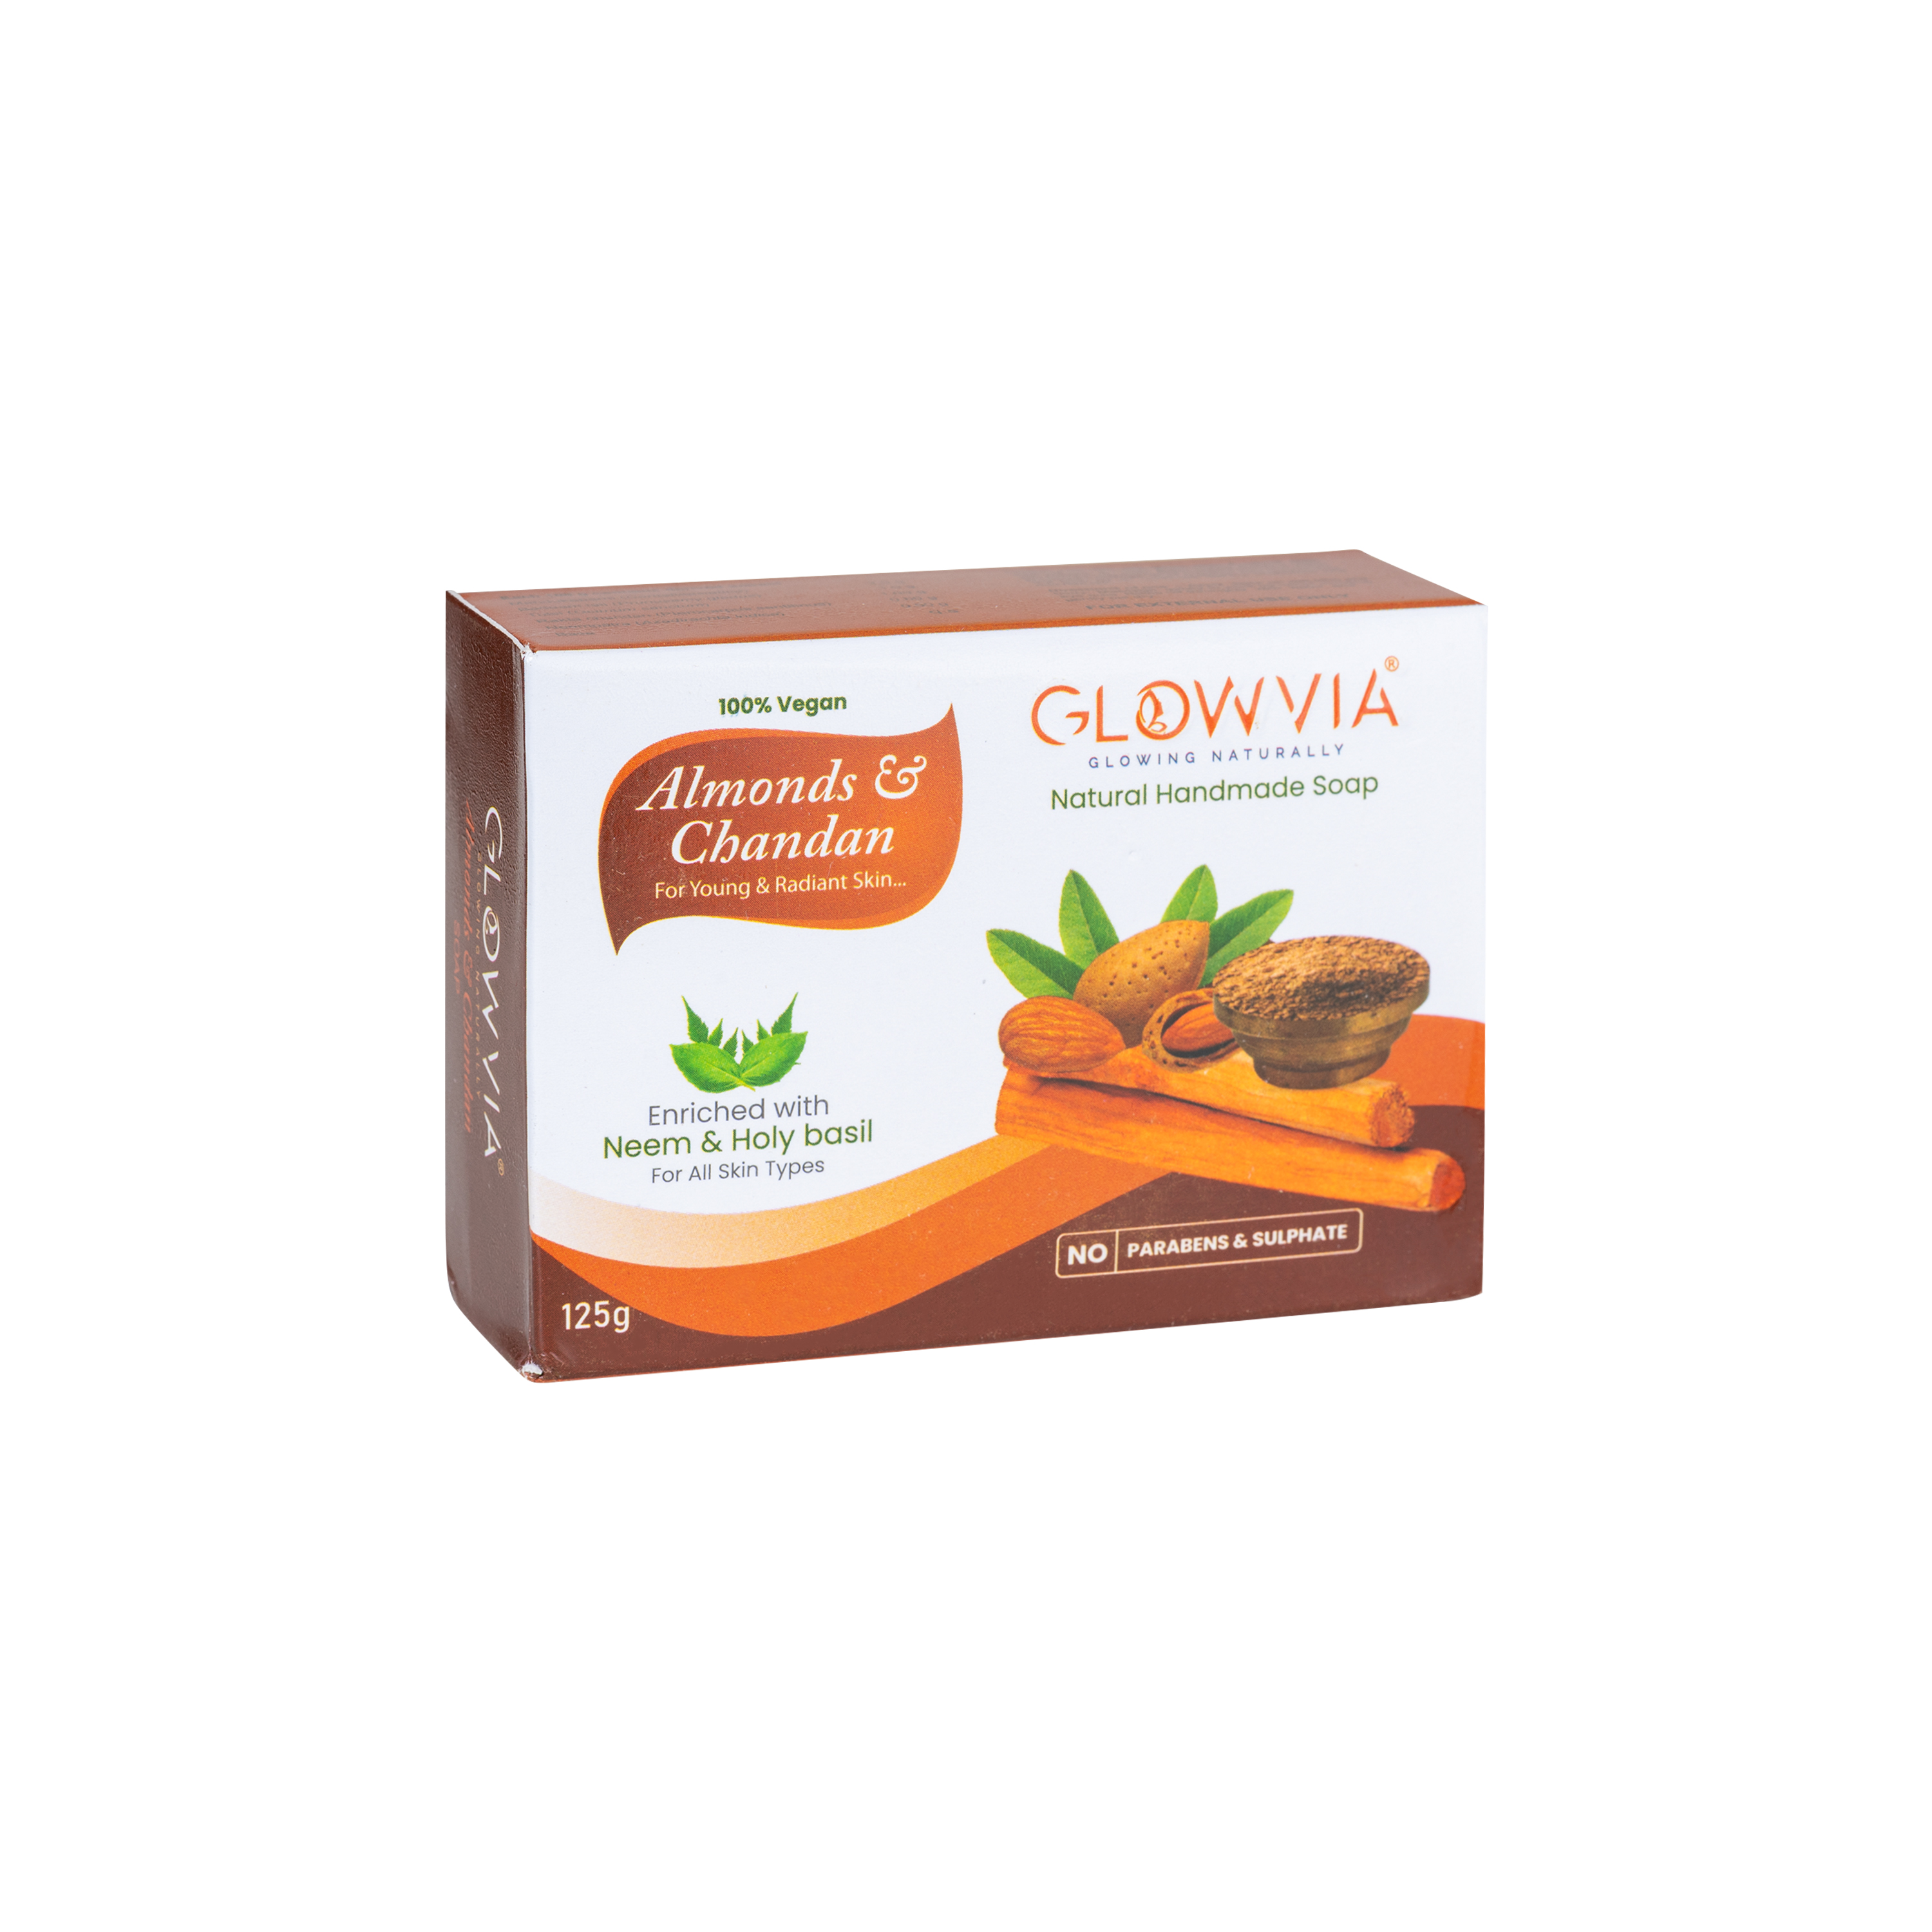 Glowvia Almonds and Chandan Natural Handmade Soap 125g (Pack of 3)